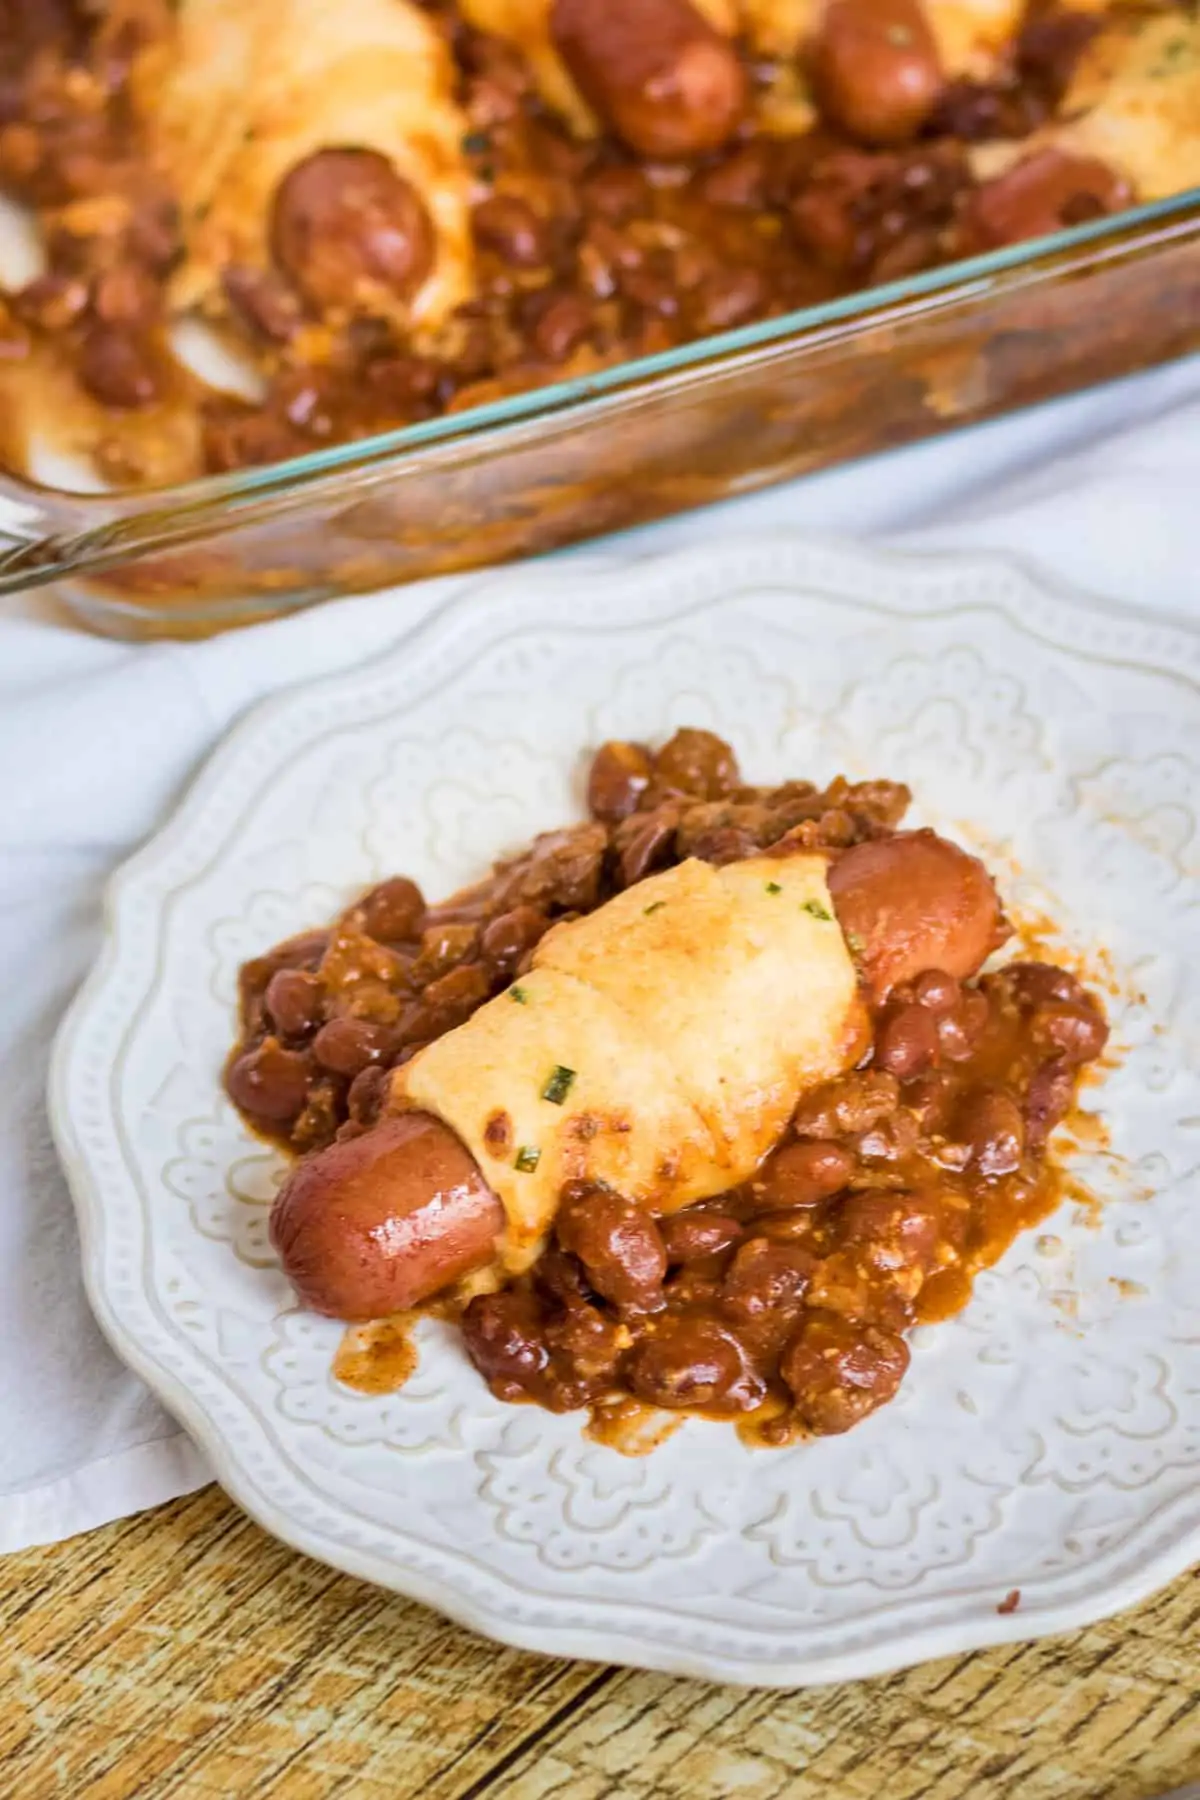 Plate with a chili cheese dog on top of a mound of chili.